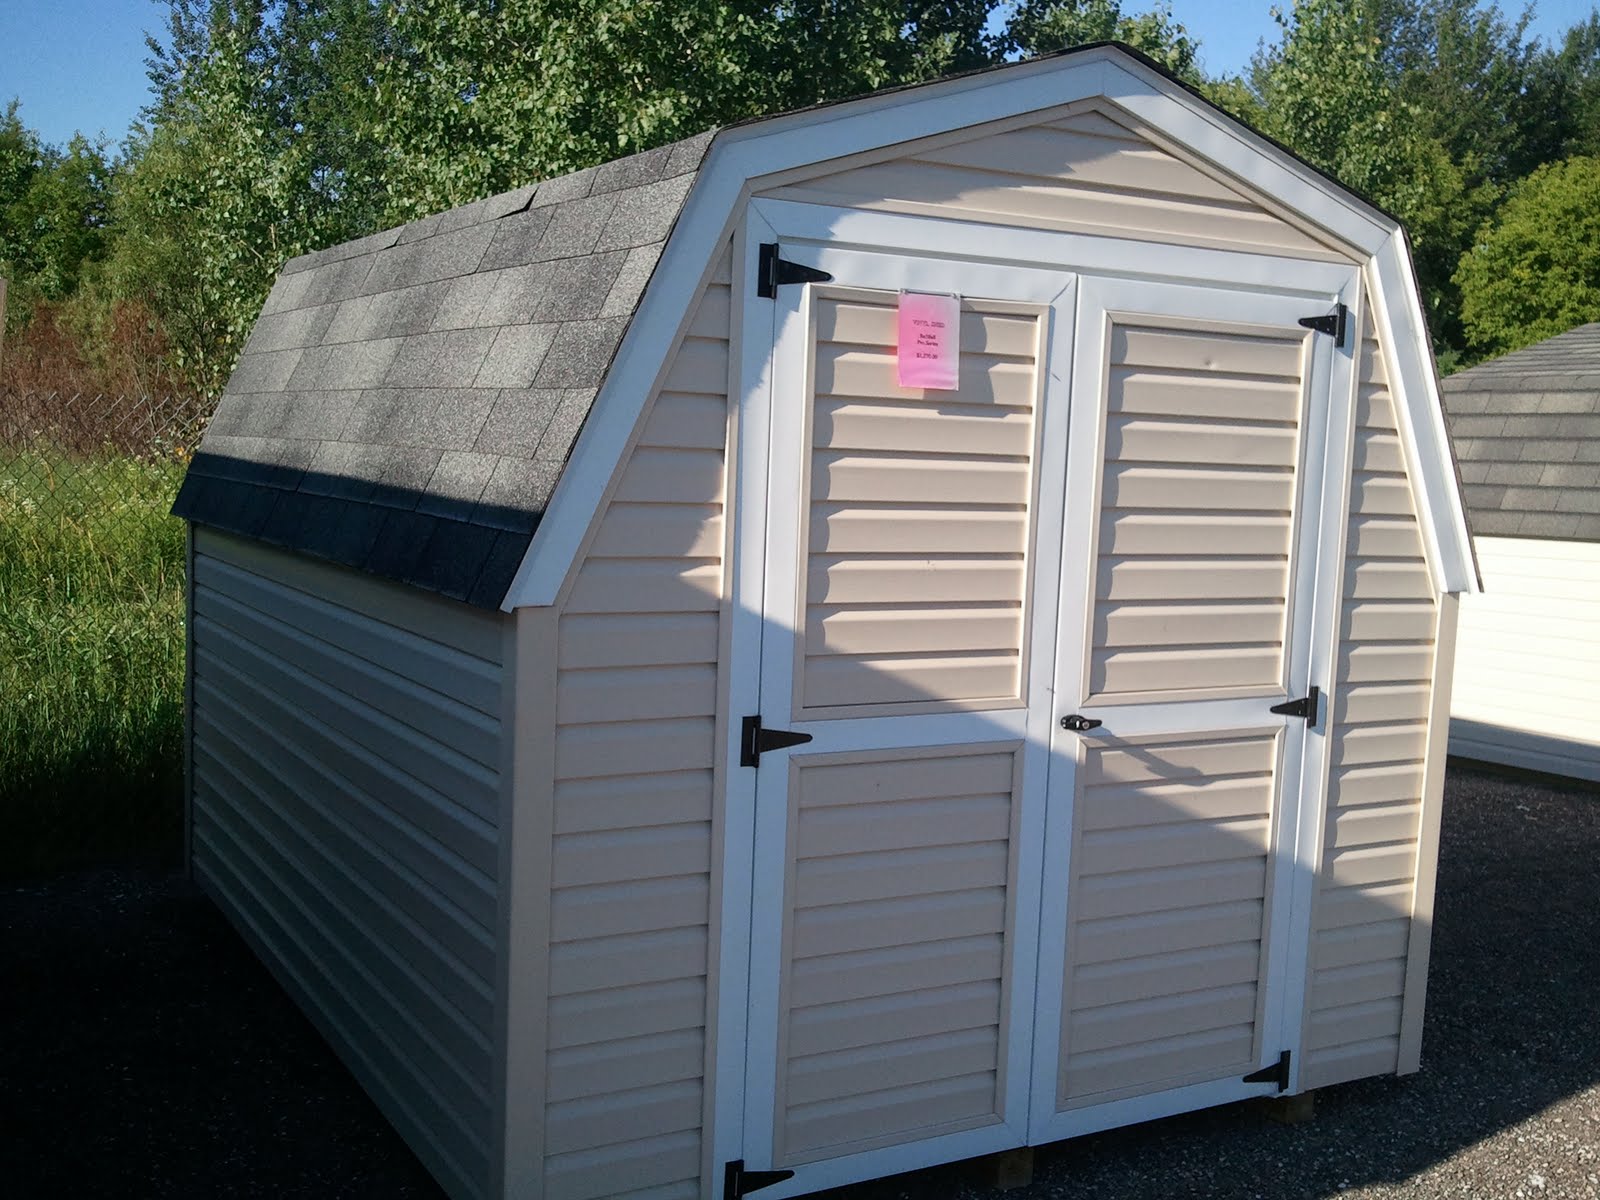 Amish Storage Sheds - Purchase Or Rent-To-Own: Storage Buildings ...